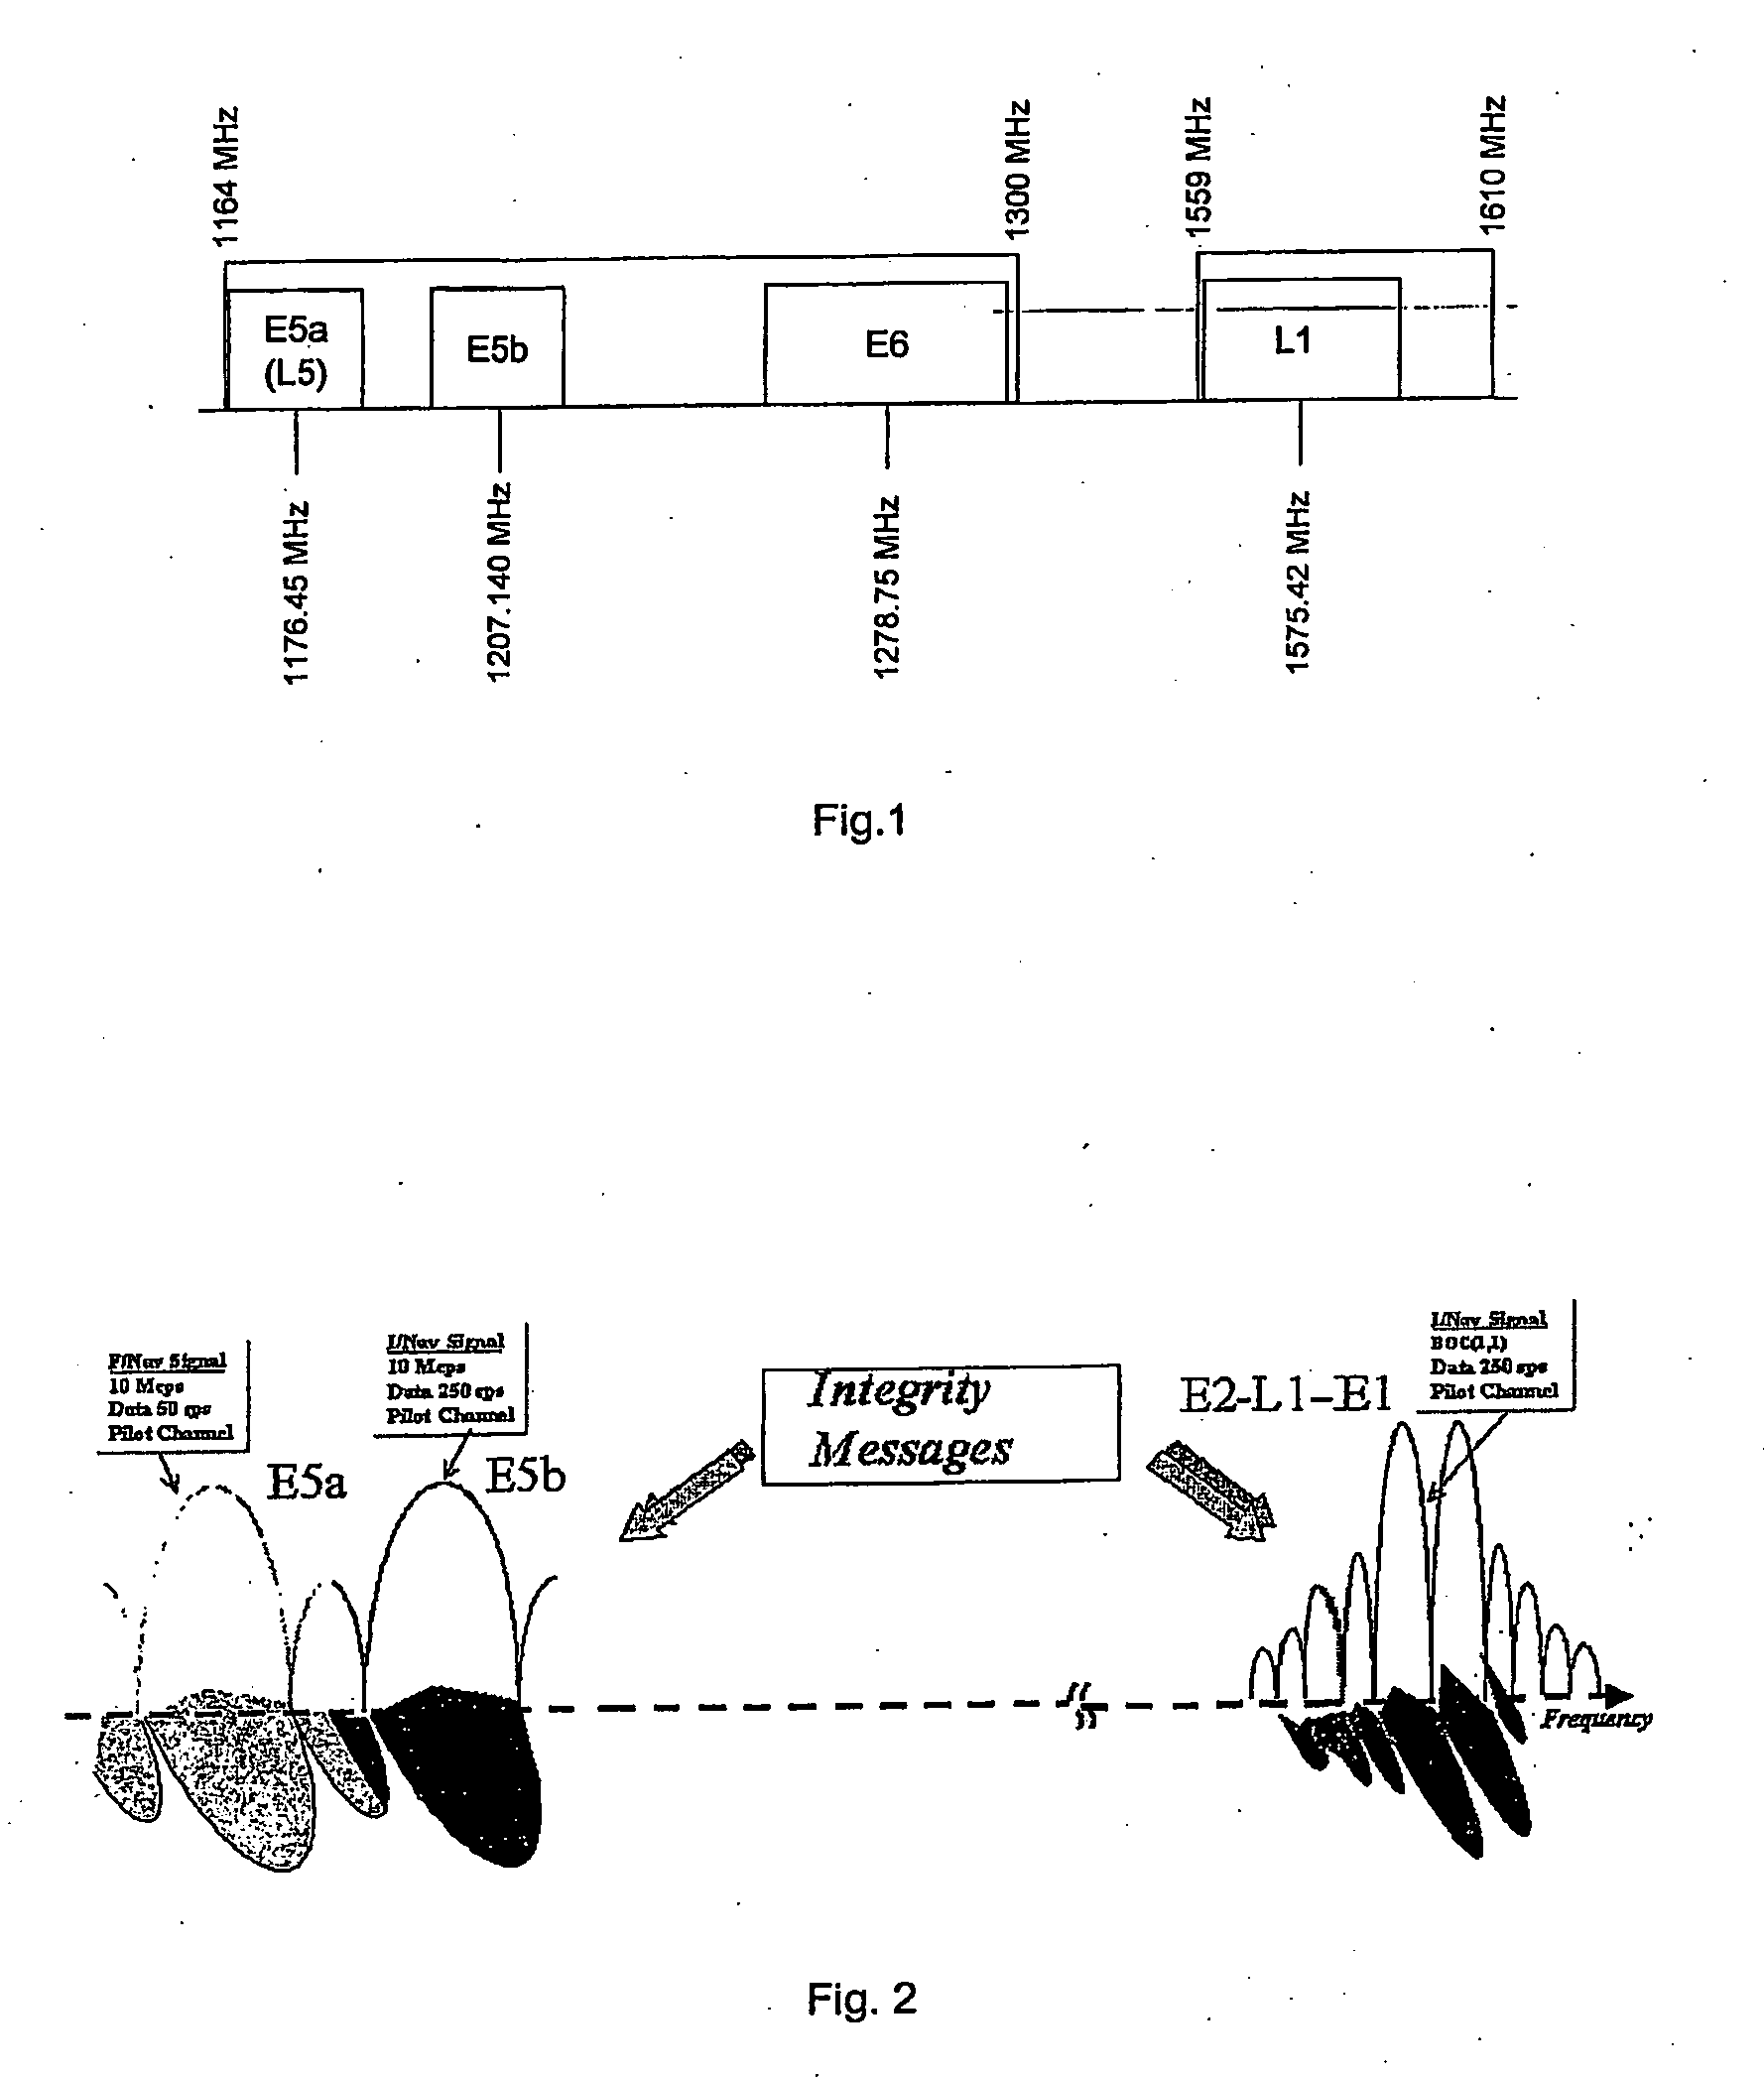 Method and Apparatus for Providing Integrity Information for Users of a Global Navigation System